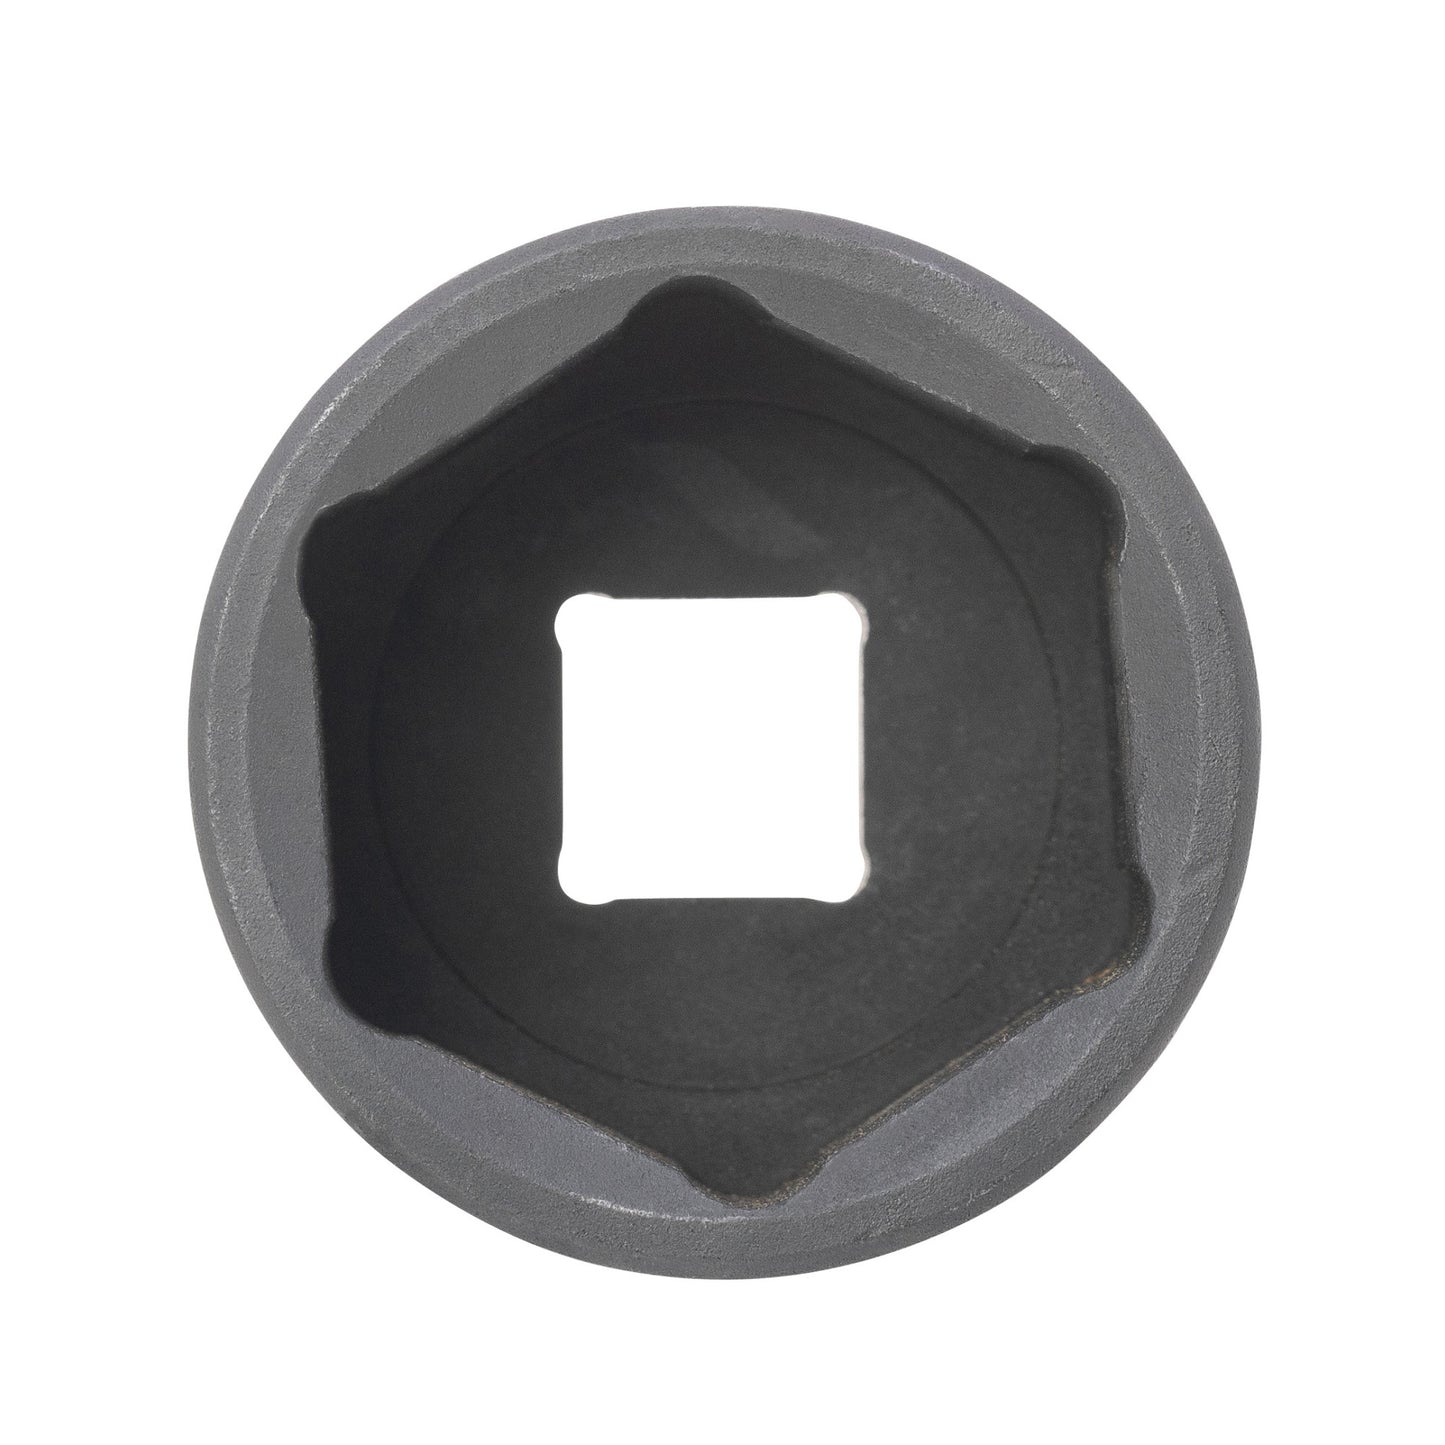 1/2-inch Drive x 1-5/16-inch Shallow 6-Point Impact SAE Socket